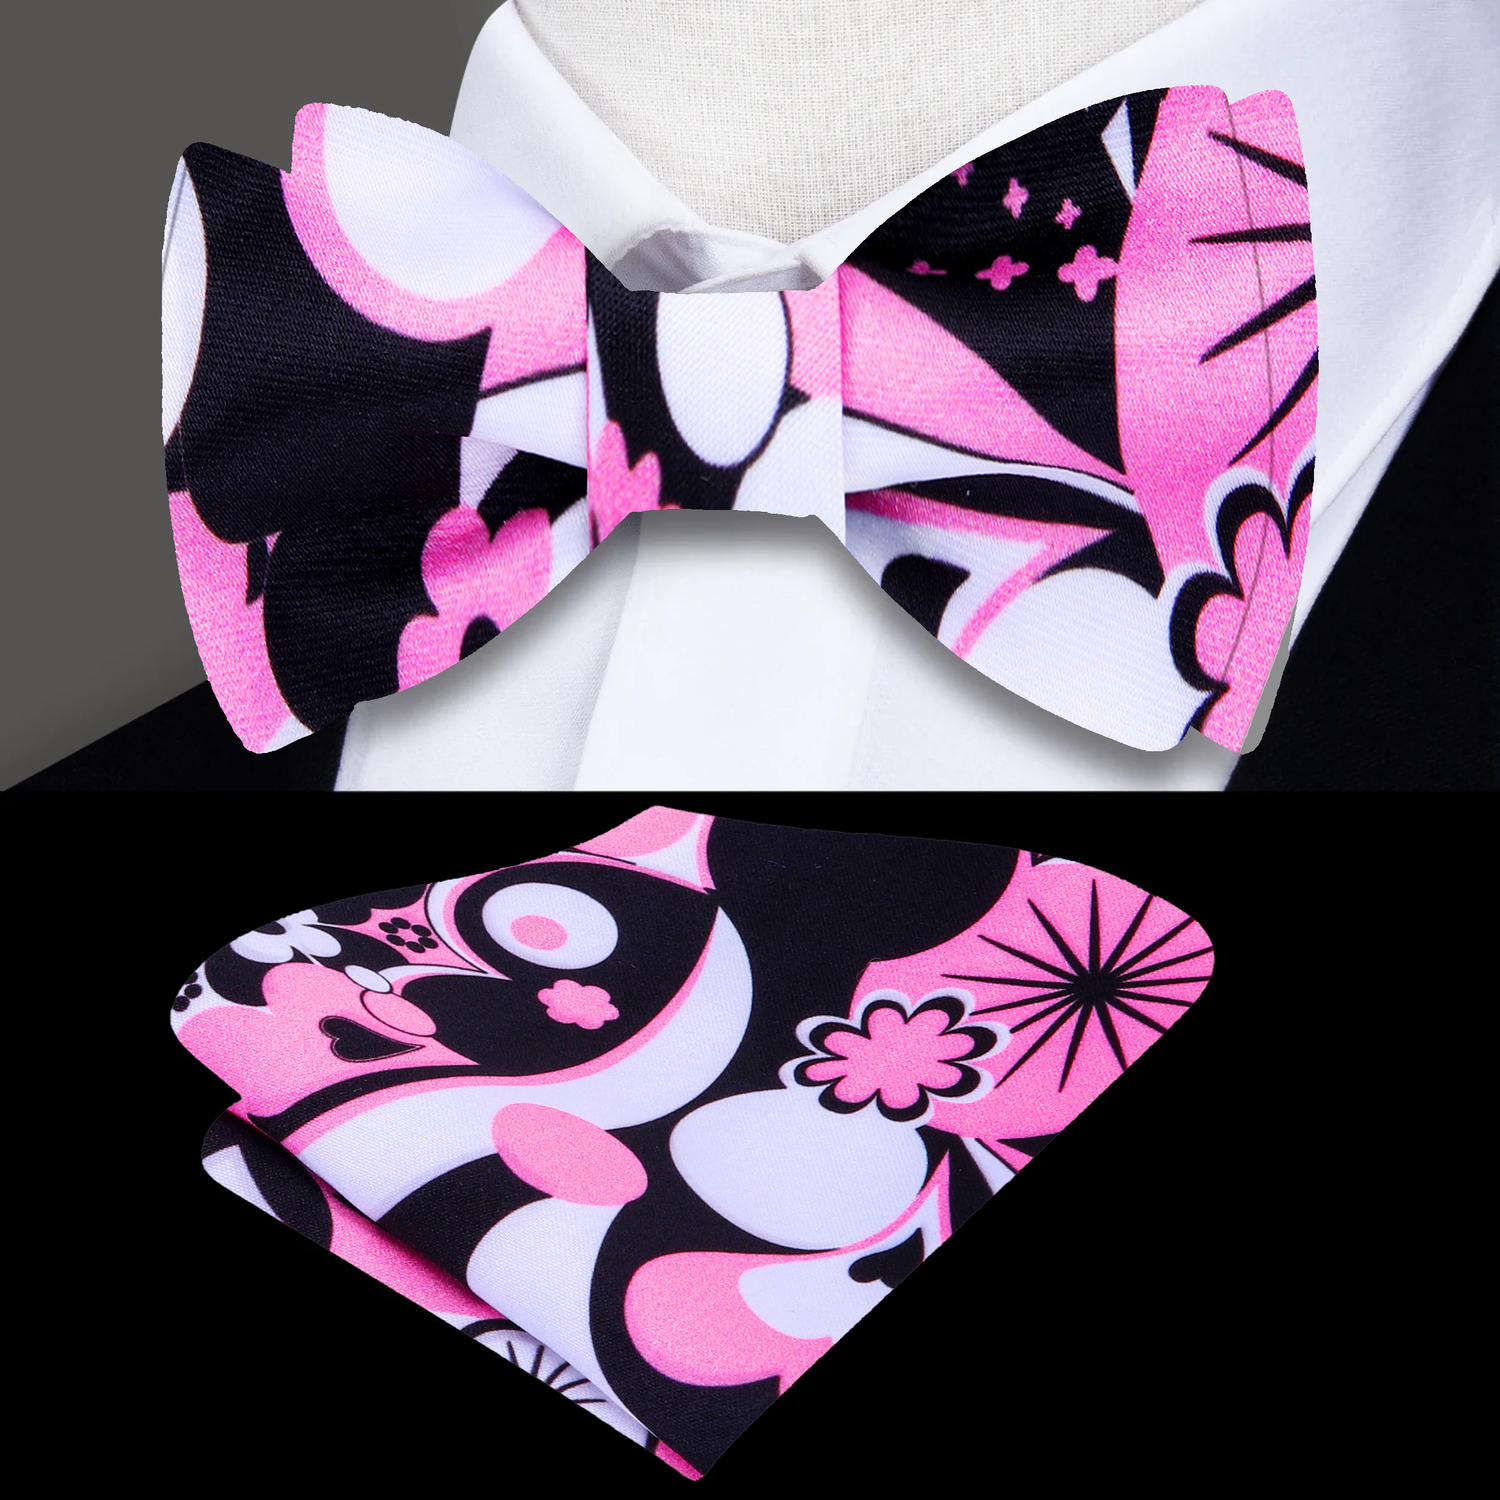 Pink, Black, White Abstract Hearts Bow Tie and Pocket Square